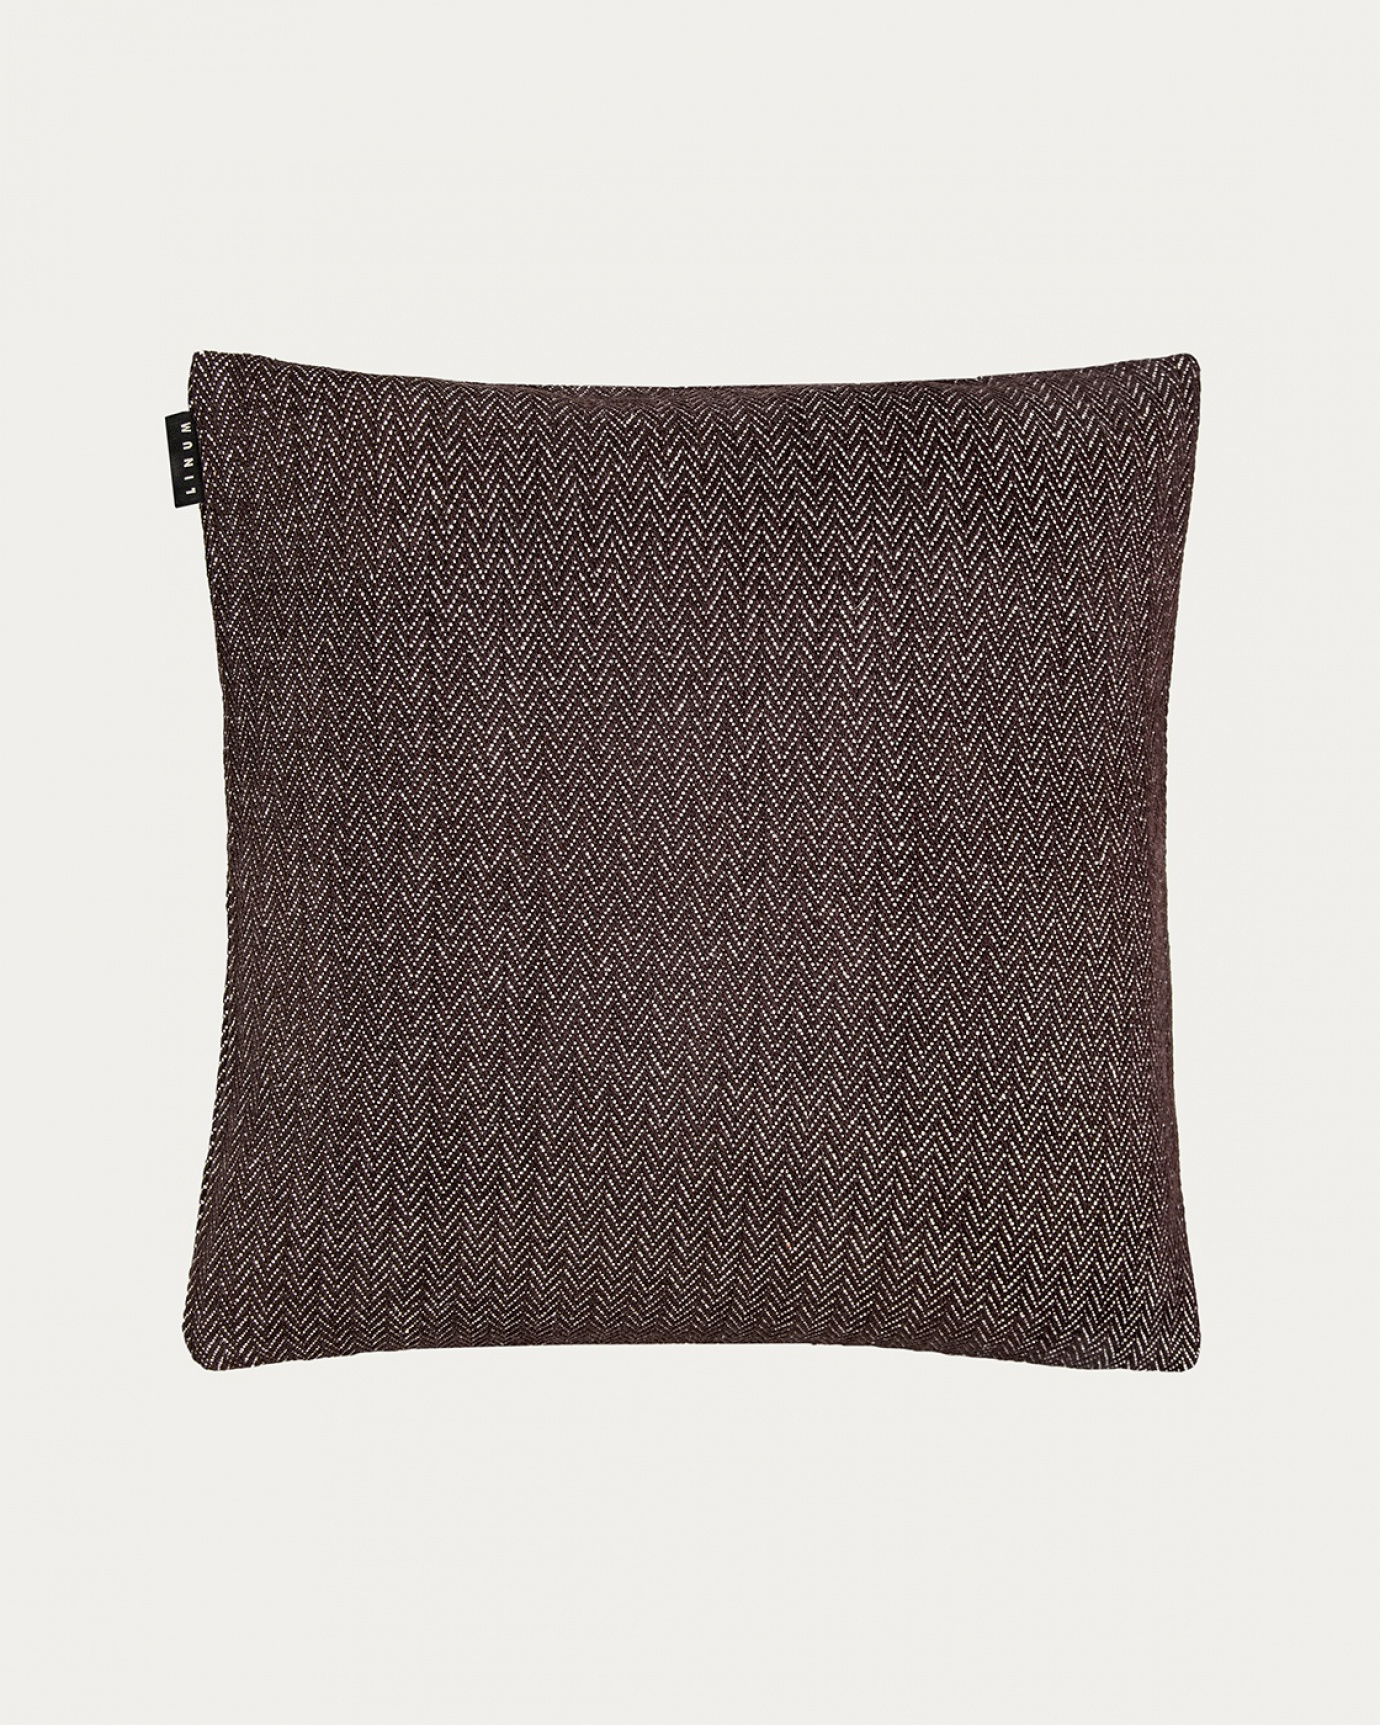 Product image dark brown SHEPARD cushion cover made of soft cotton with a discreet herringbone pattern from LINUM DESIGN. Size 50x50 cm.